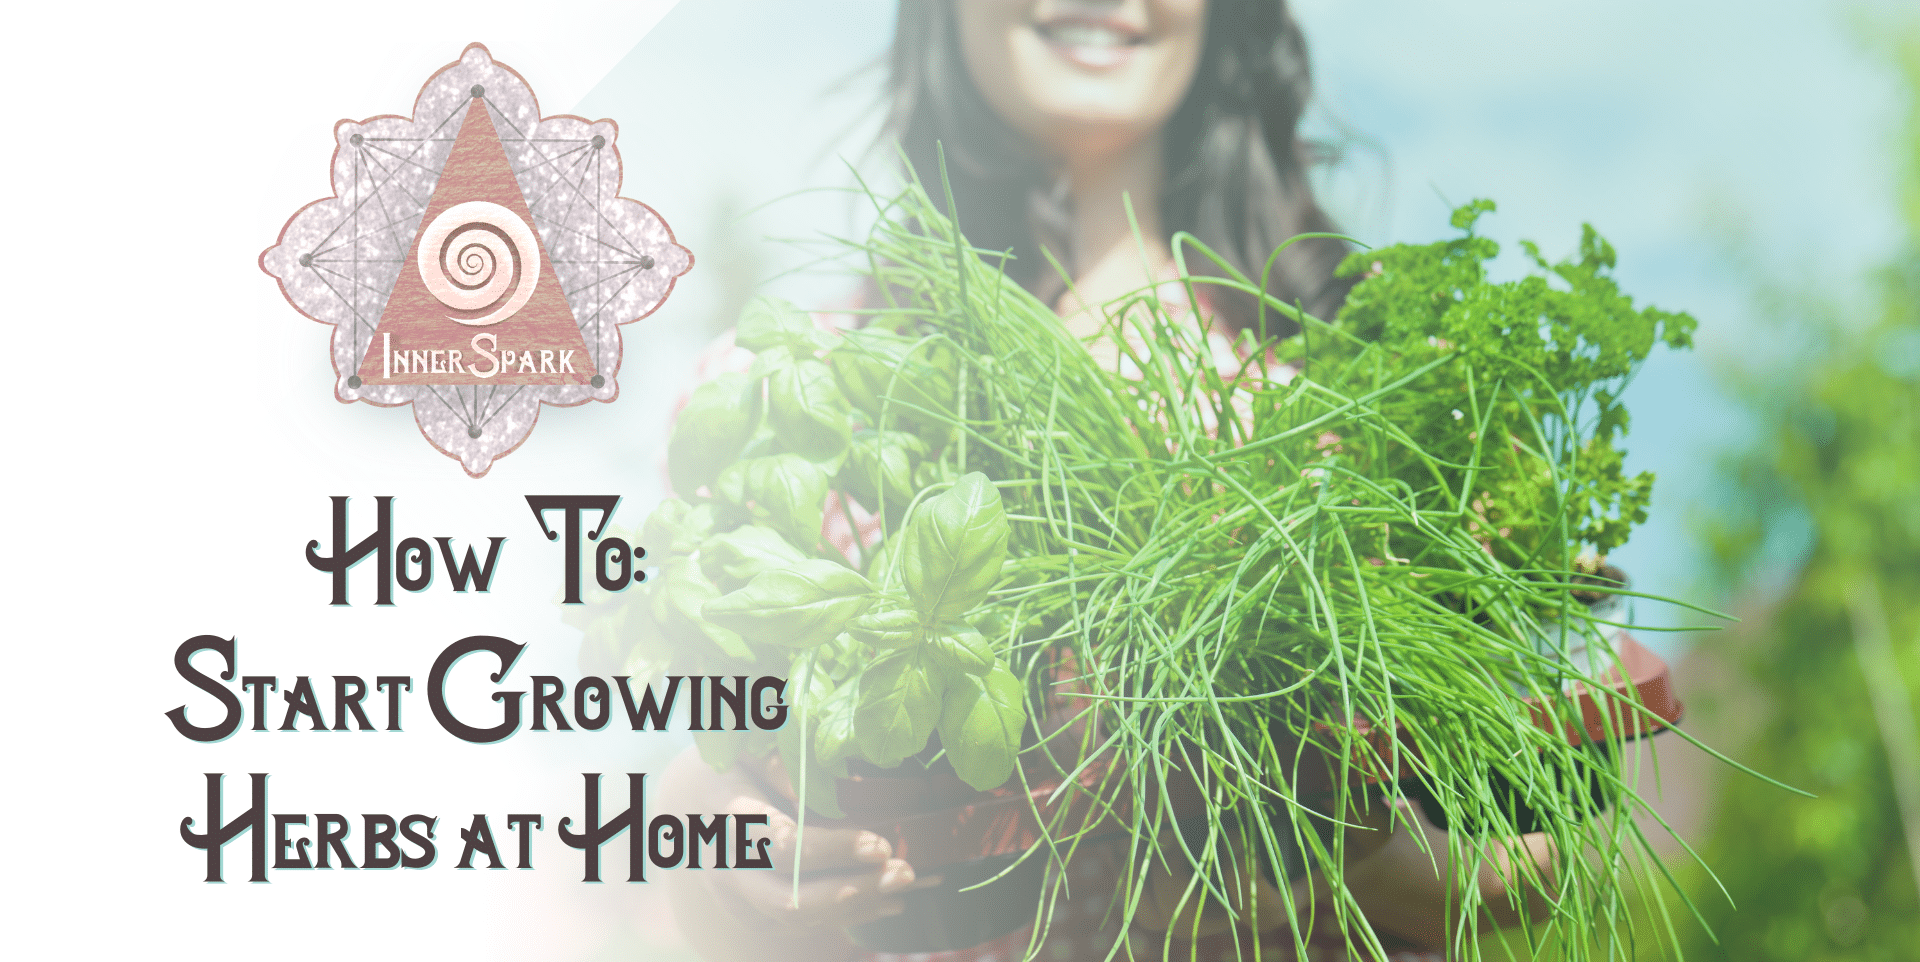 How To: Start Growing Herbs at Home